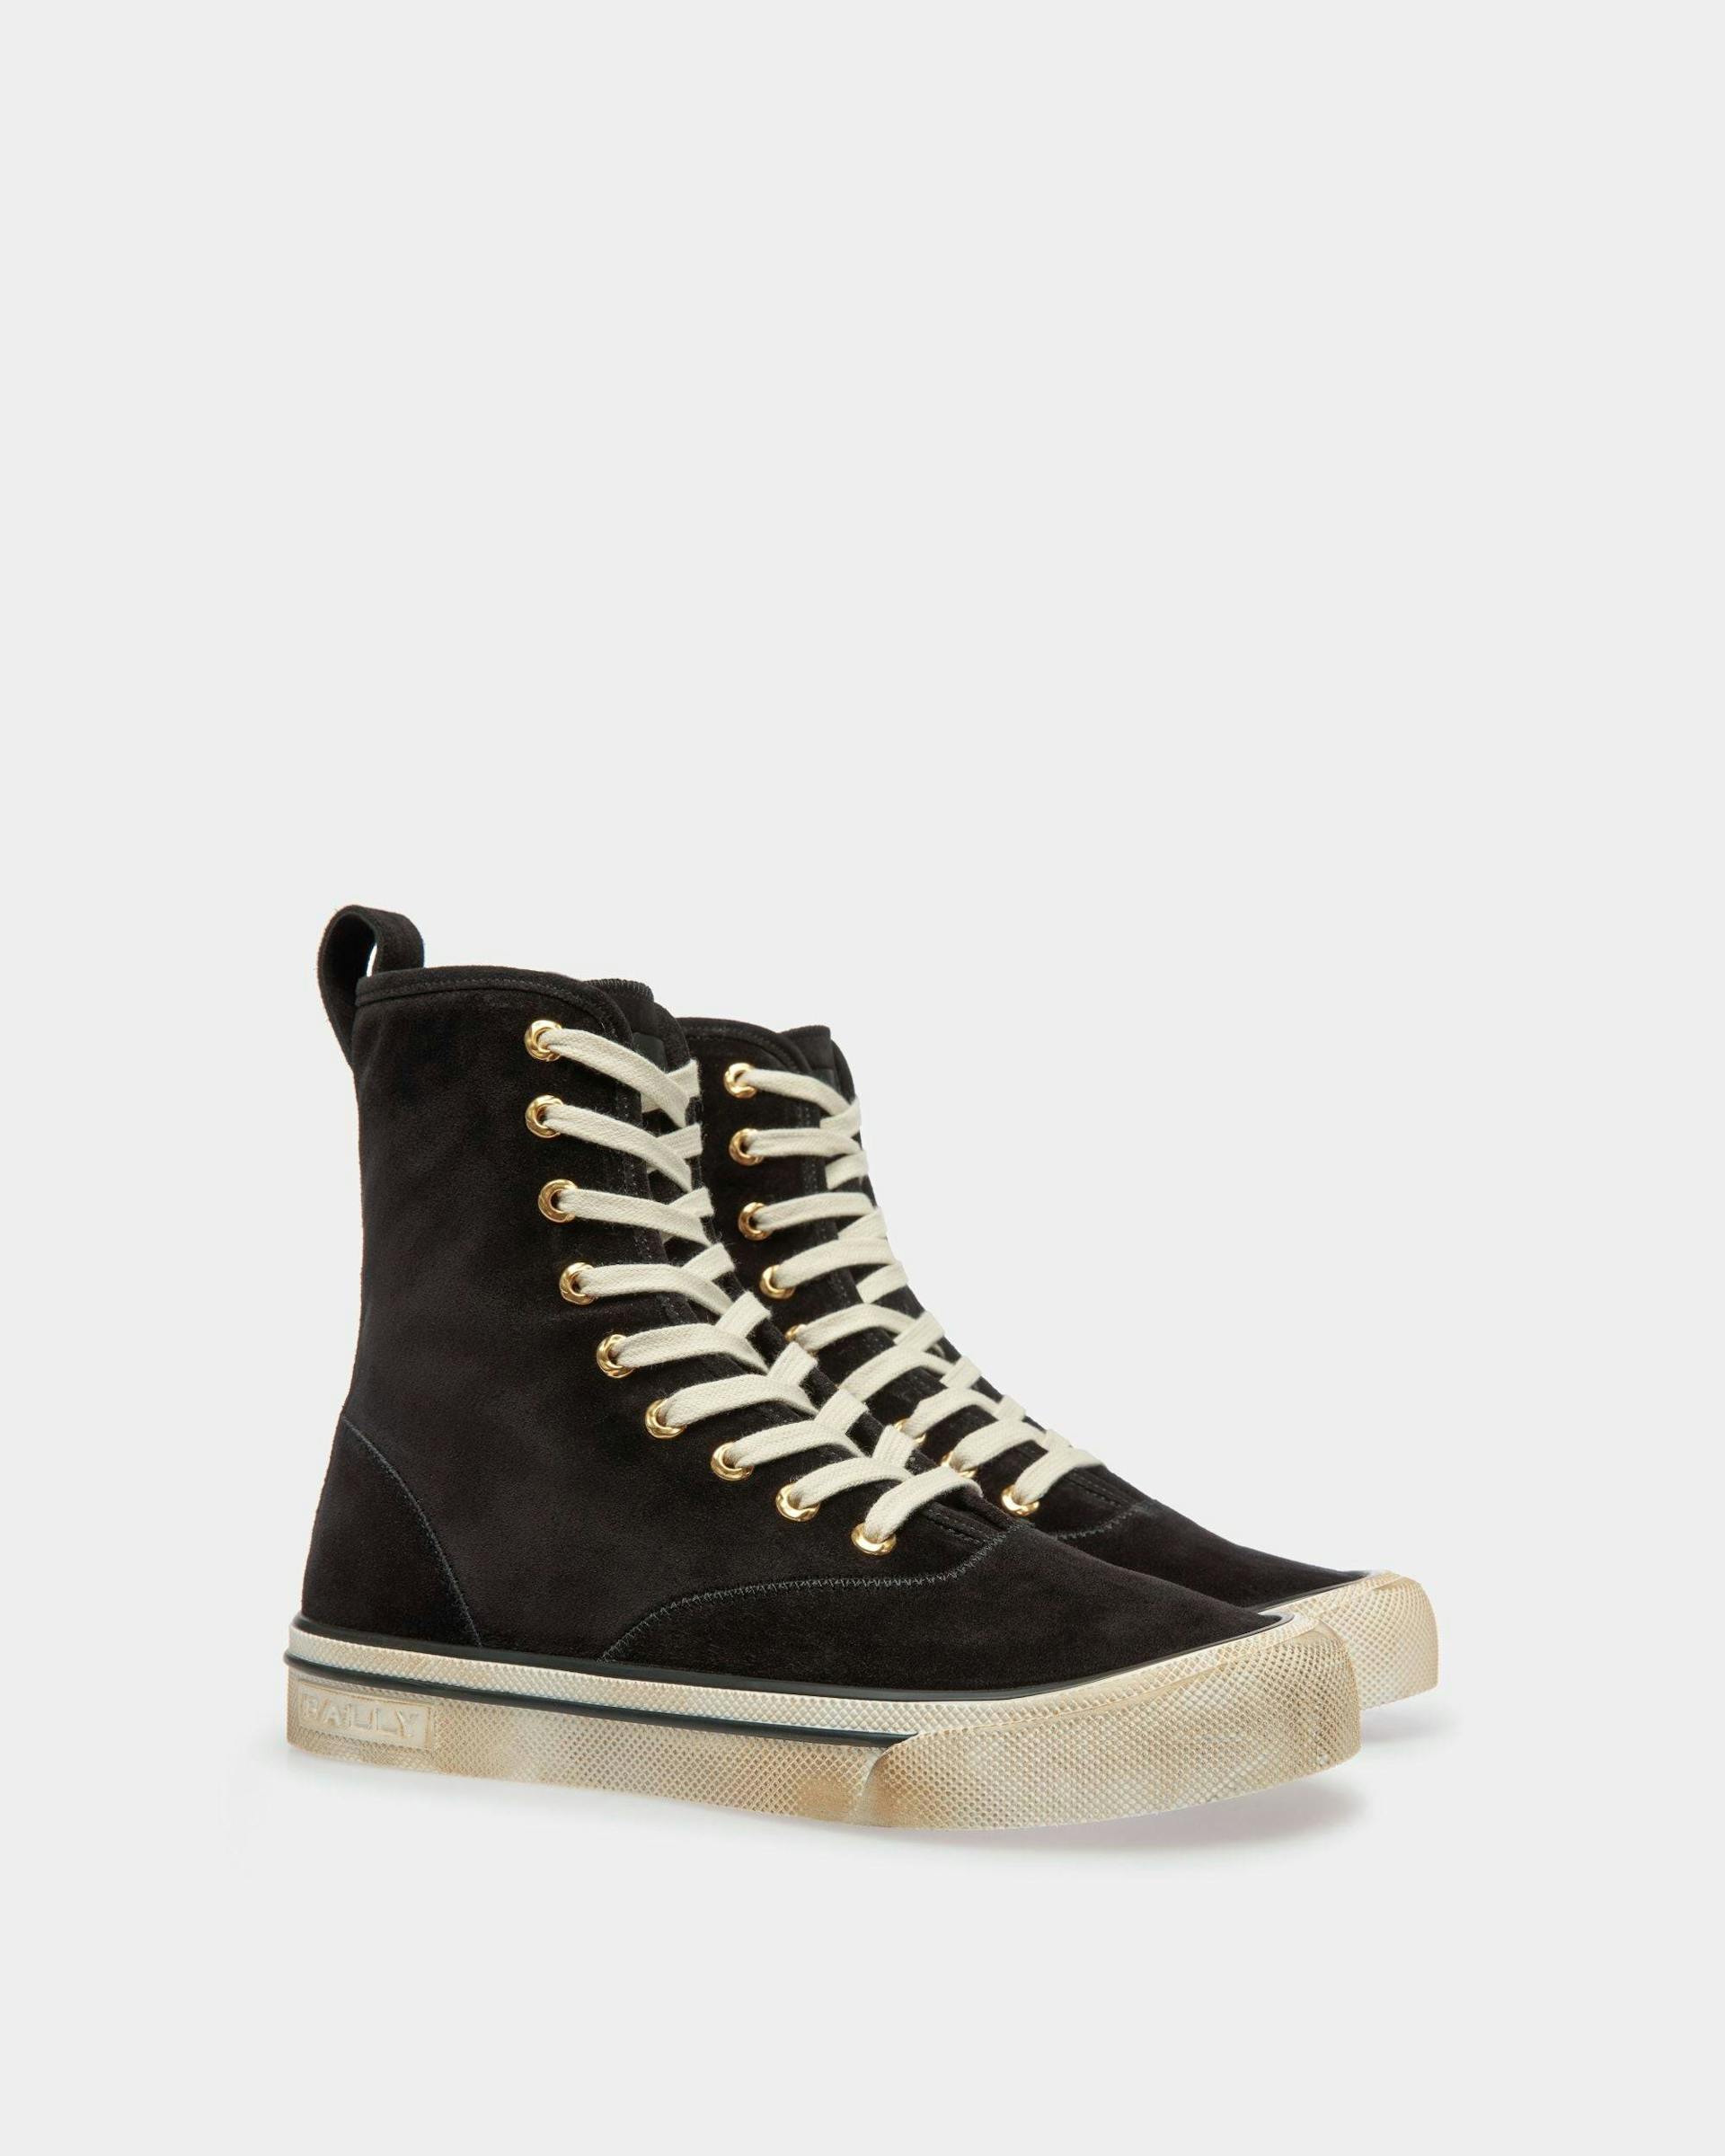 Men's Santa Ana High Top Sneakers In Black Suede | Bally | Still Life 3/4 Front